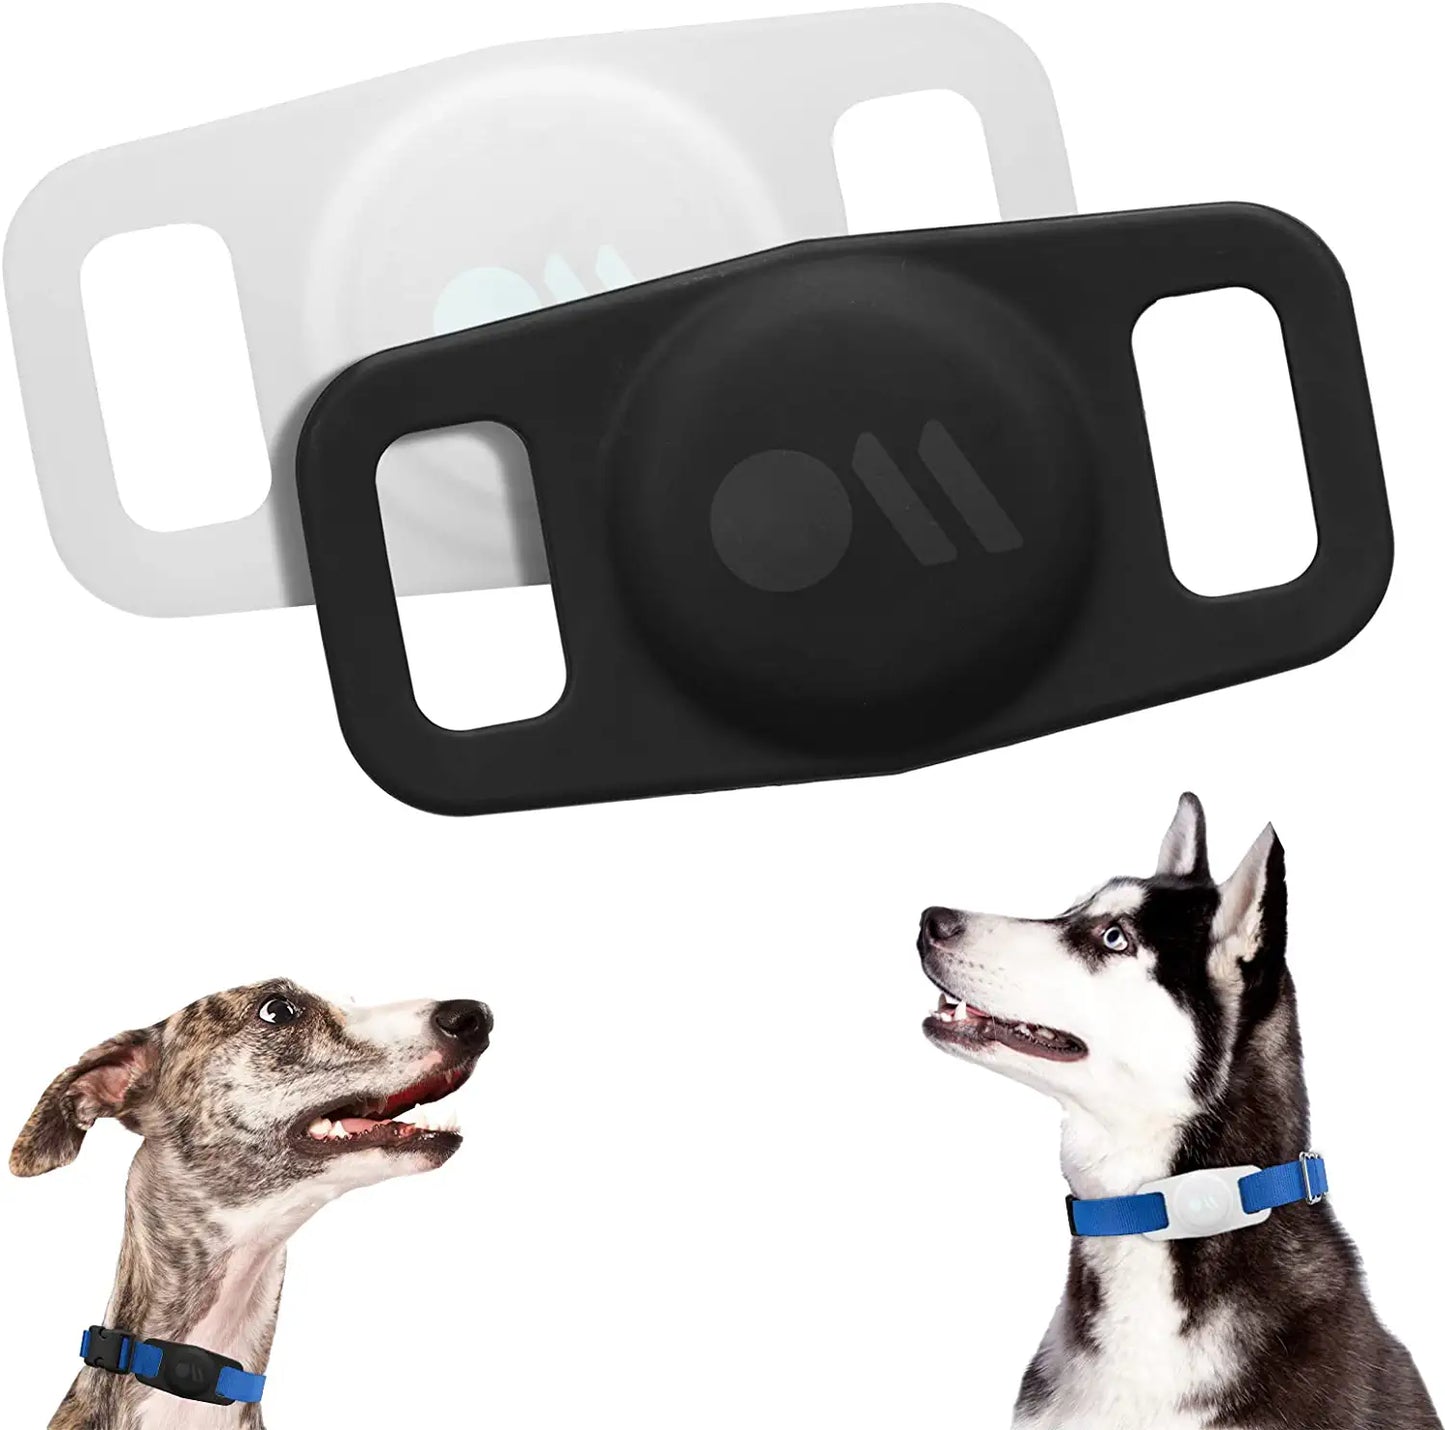 Case-Mate Protective Airtag Case for Dog Collar, Anti-Lost Airtag Loop for Dog GPS Tracker, Airtag Case Compatible with Cat/Dog Collar, (Black) Electronics > GPS Accessories > GPS Cases Case-Mate 2 Pack - Multi  